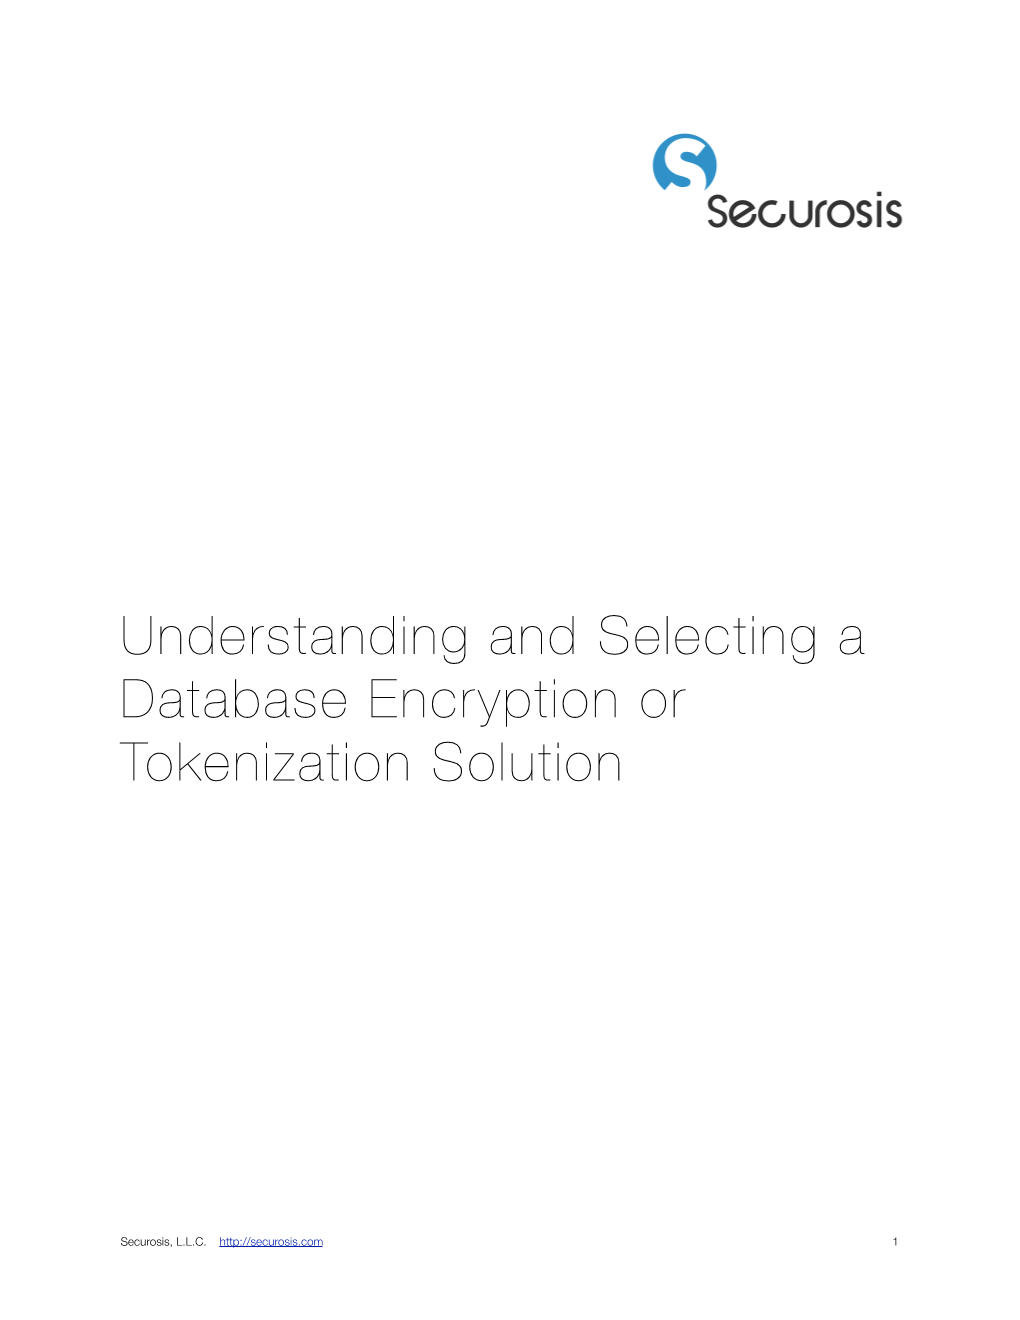 Understanding and Selecting a Database Encryption Or Tokenization Solution